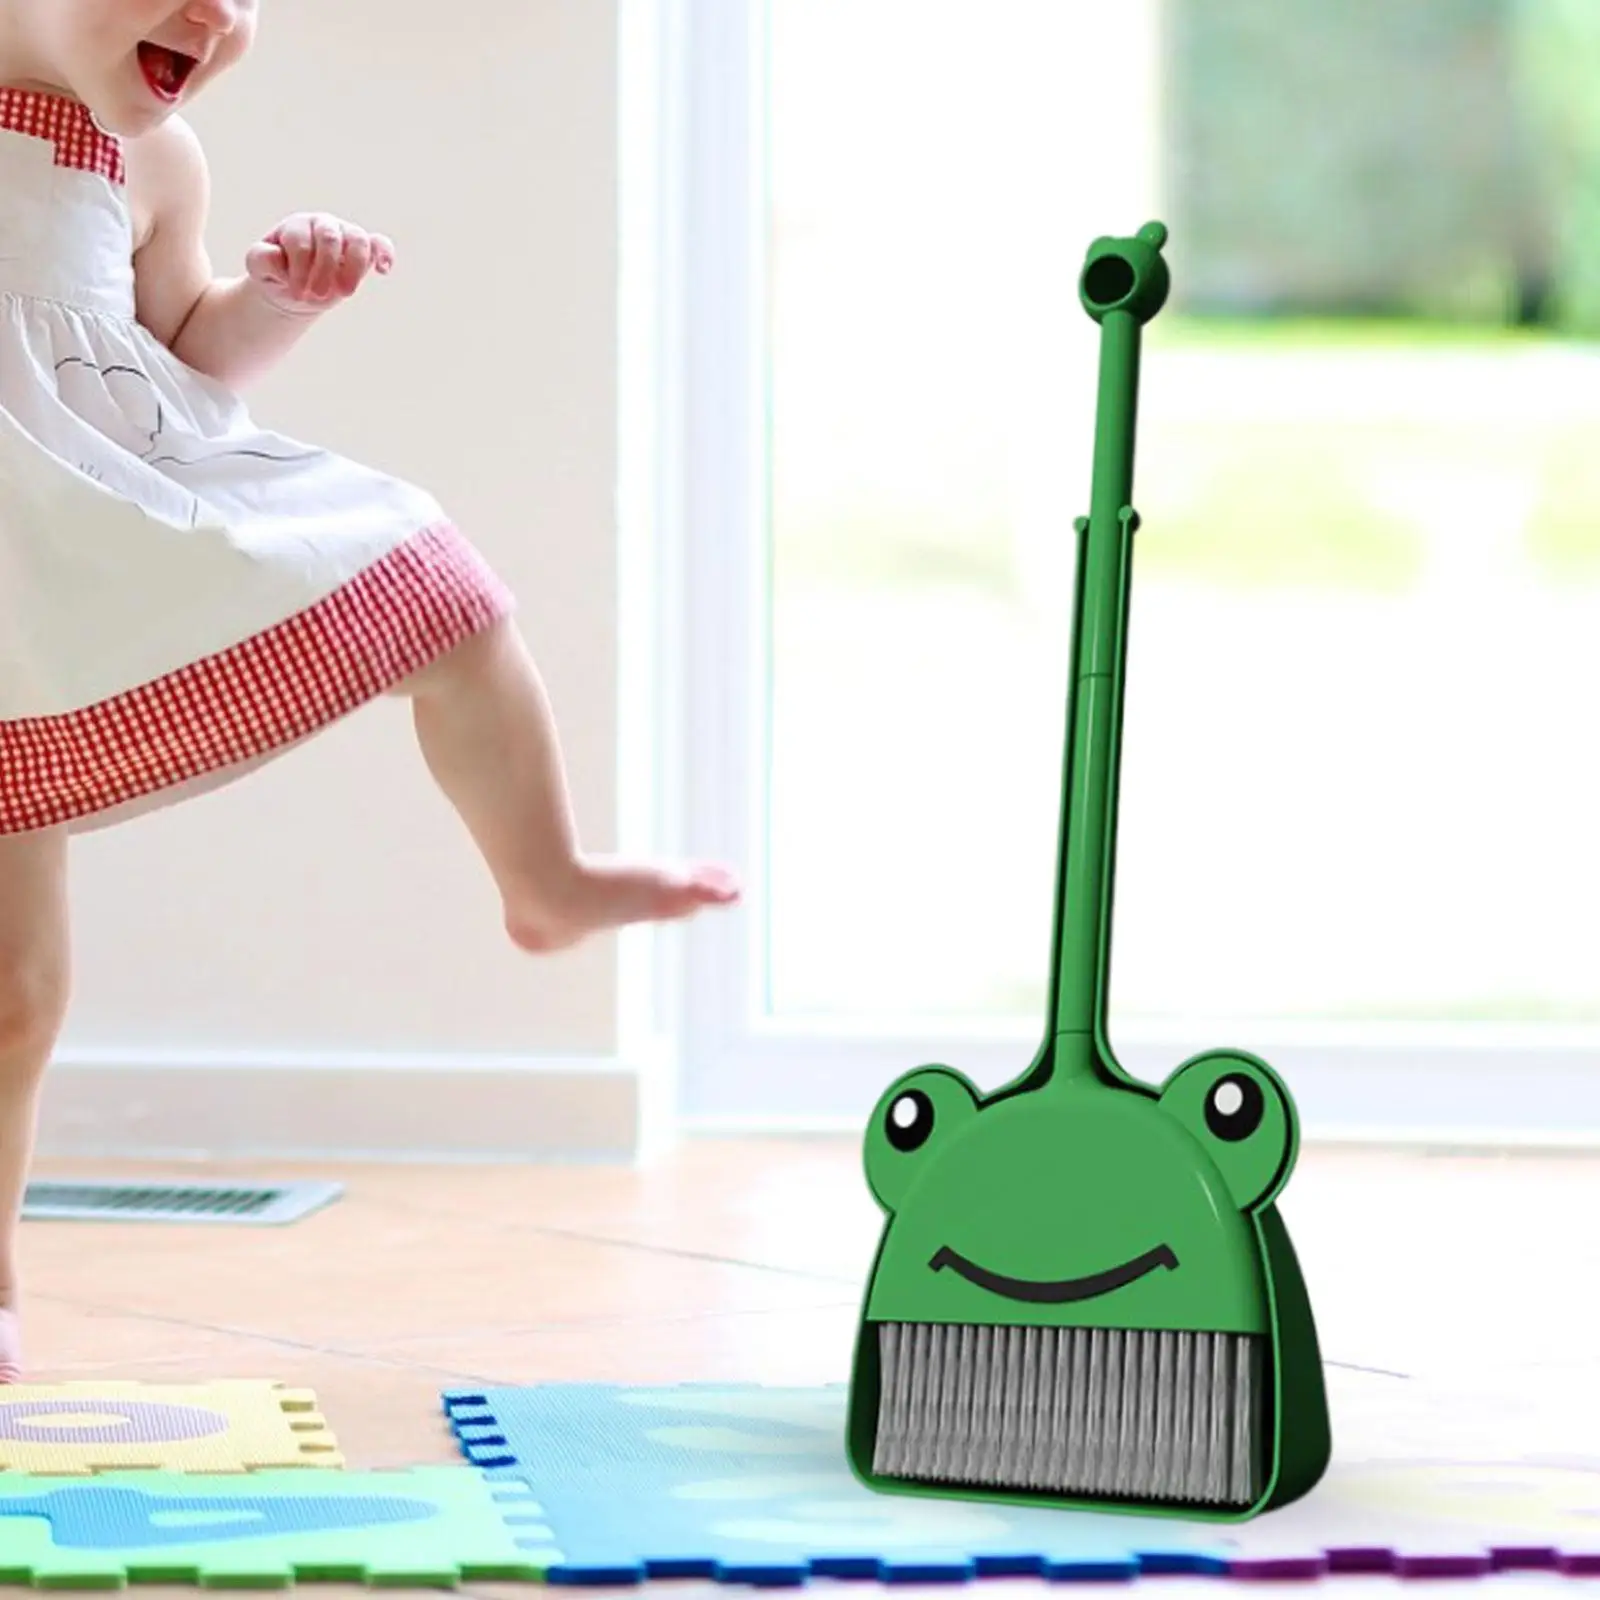 Cleaning Sweeping Play Set Educational Toddlers Cleaning Toys Set Little Housekeeping Helper Set for Preschool Age 3-6 Years Old